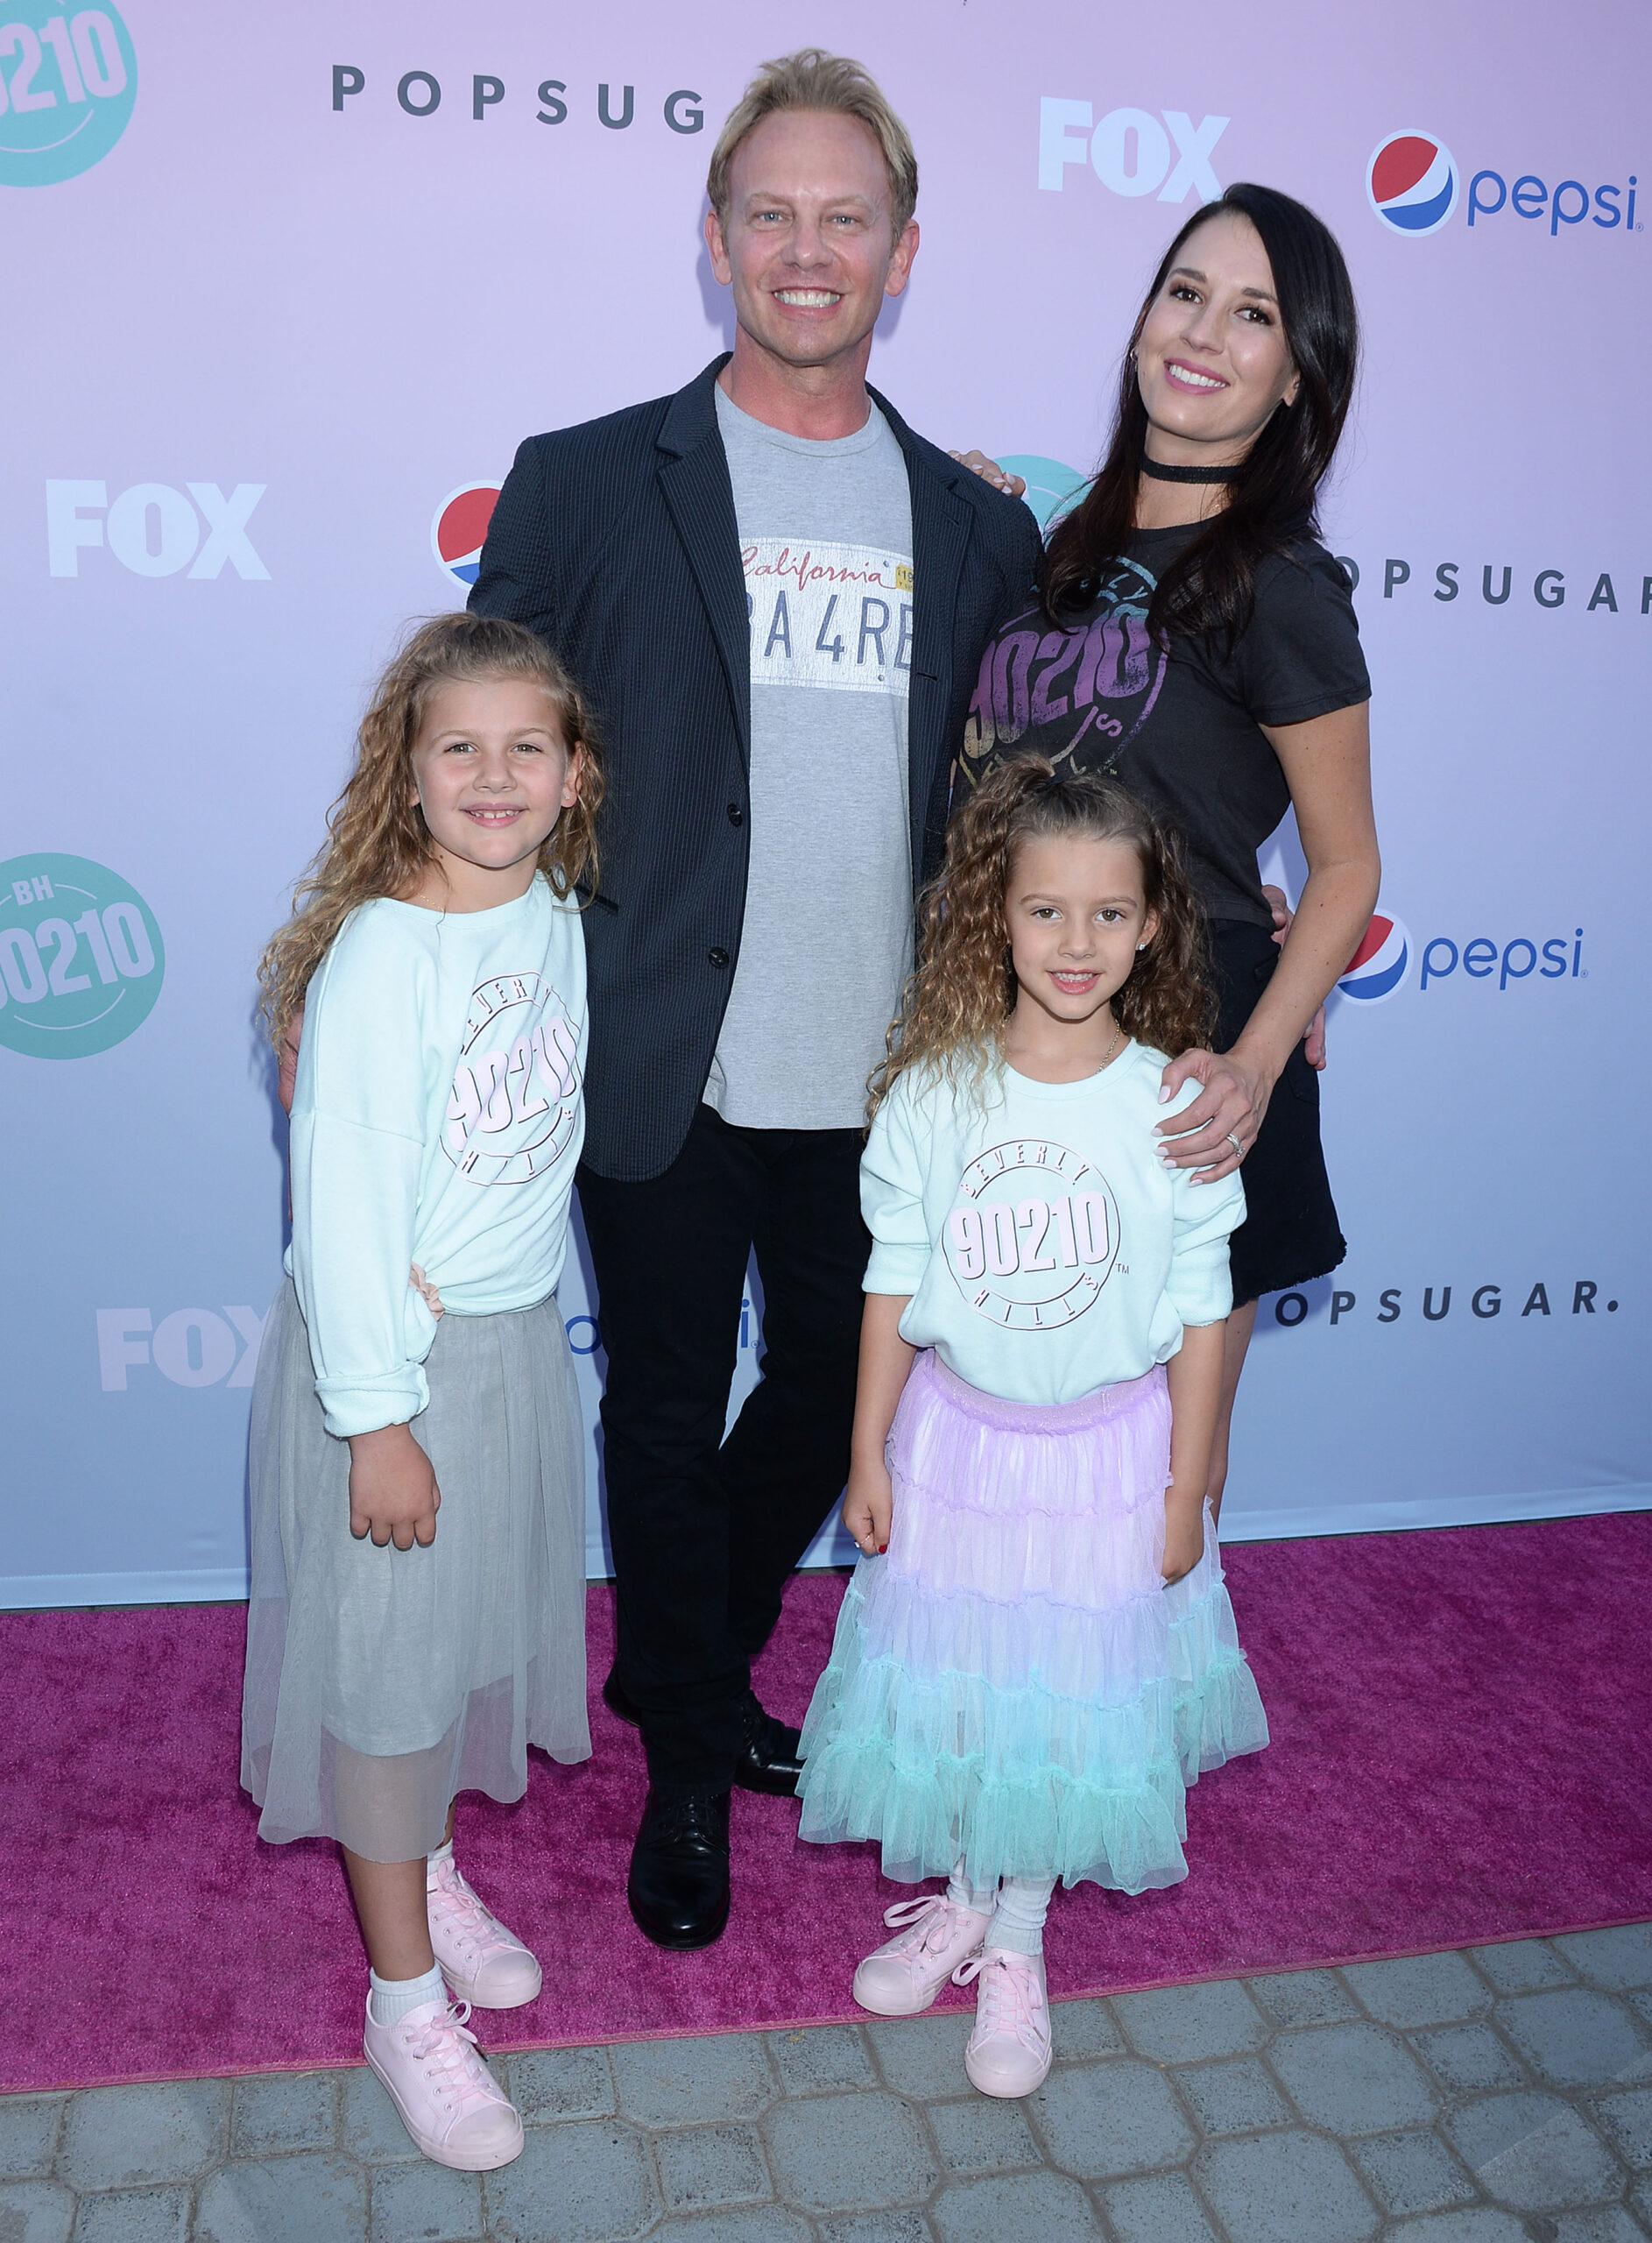 '90210' Star Ian Ziering Finally Settles Divorce With Ex-Wife After 3-Years